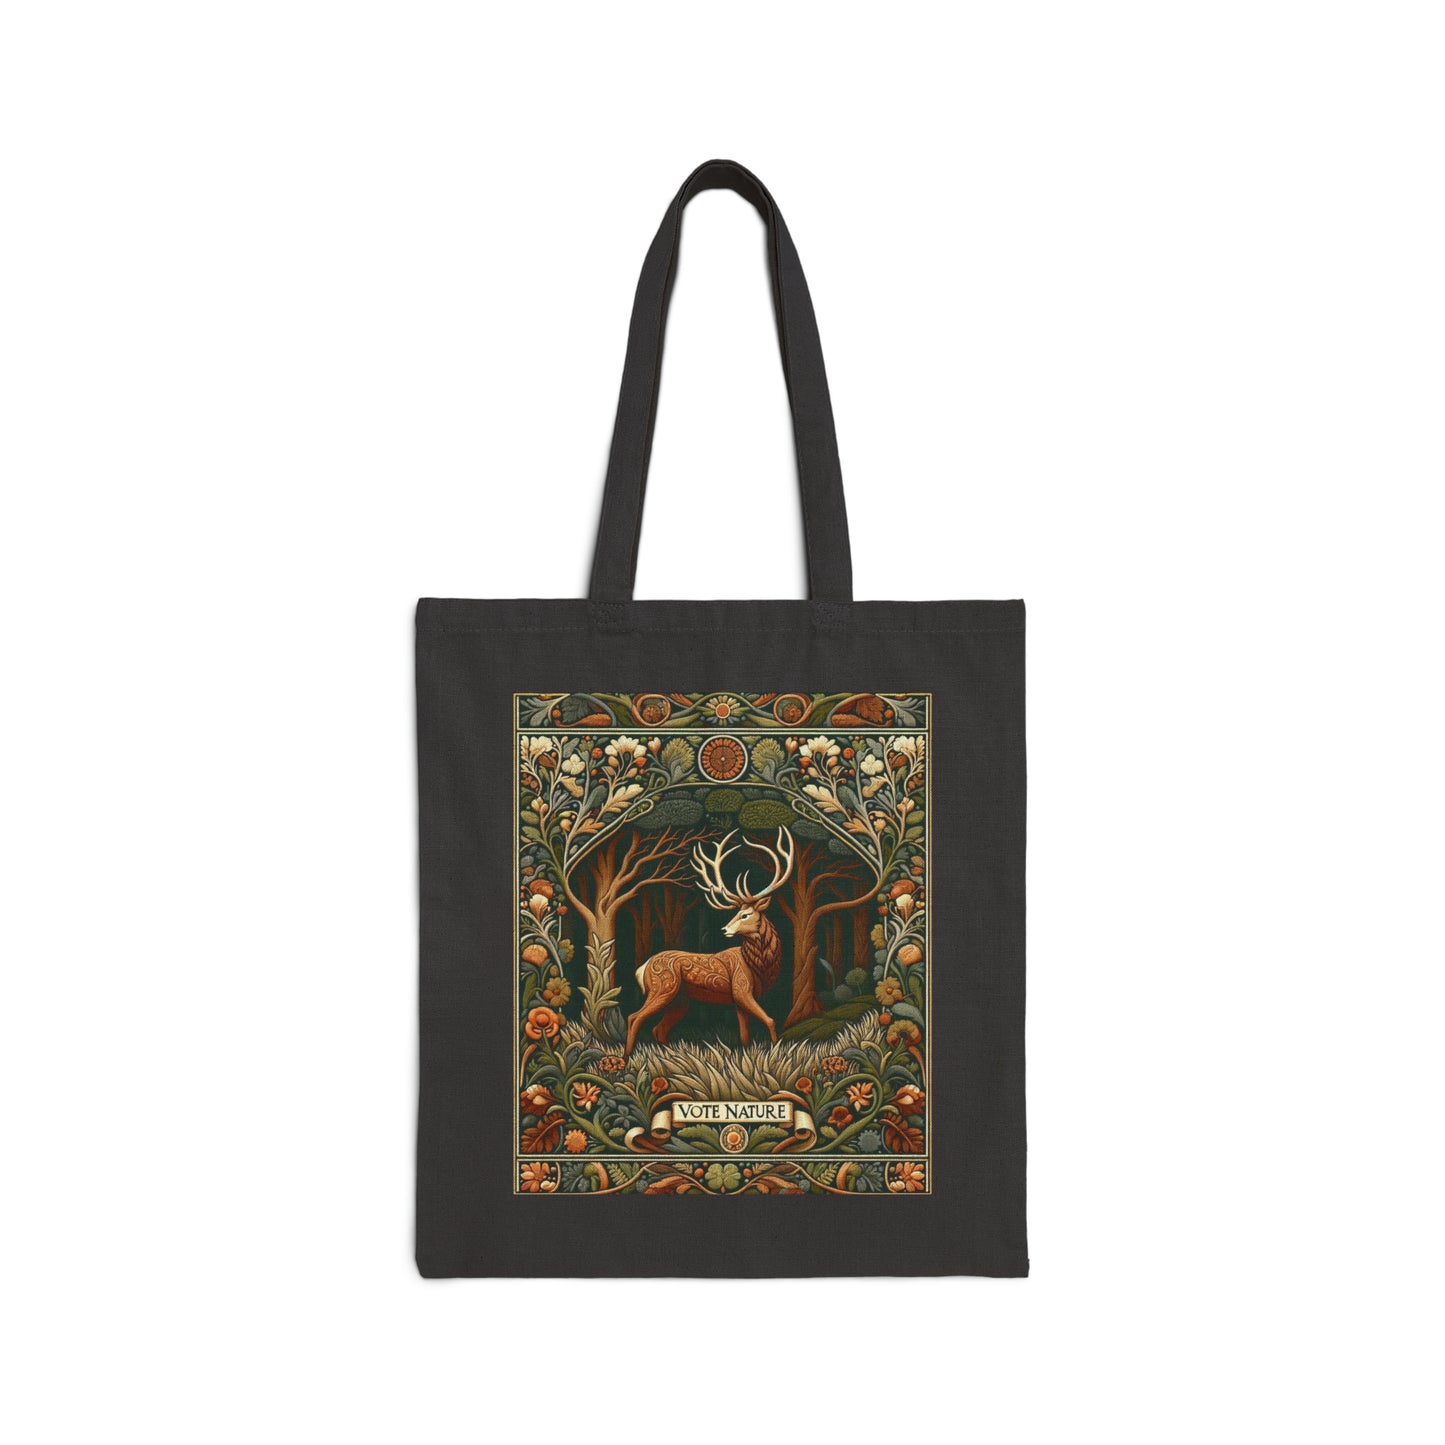 Inspirational Caring Statement Cotton Canvas Tote Bag: Vote Nature! & carry a laptop, kindle, phone, notebook, goodies to work/coffee shop